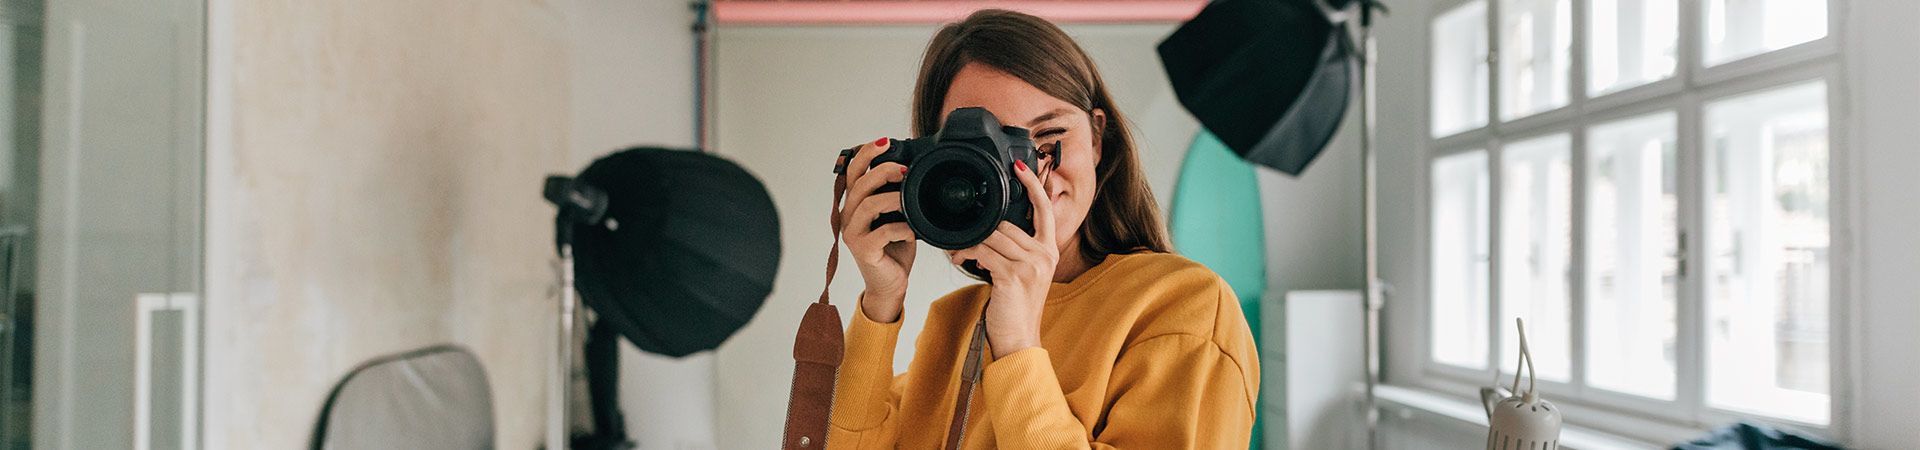 The different types of photography – a photographer taking photos in a photo studio.